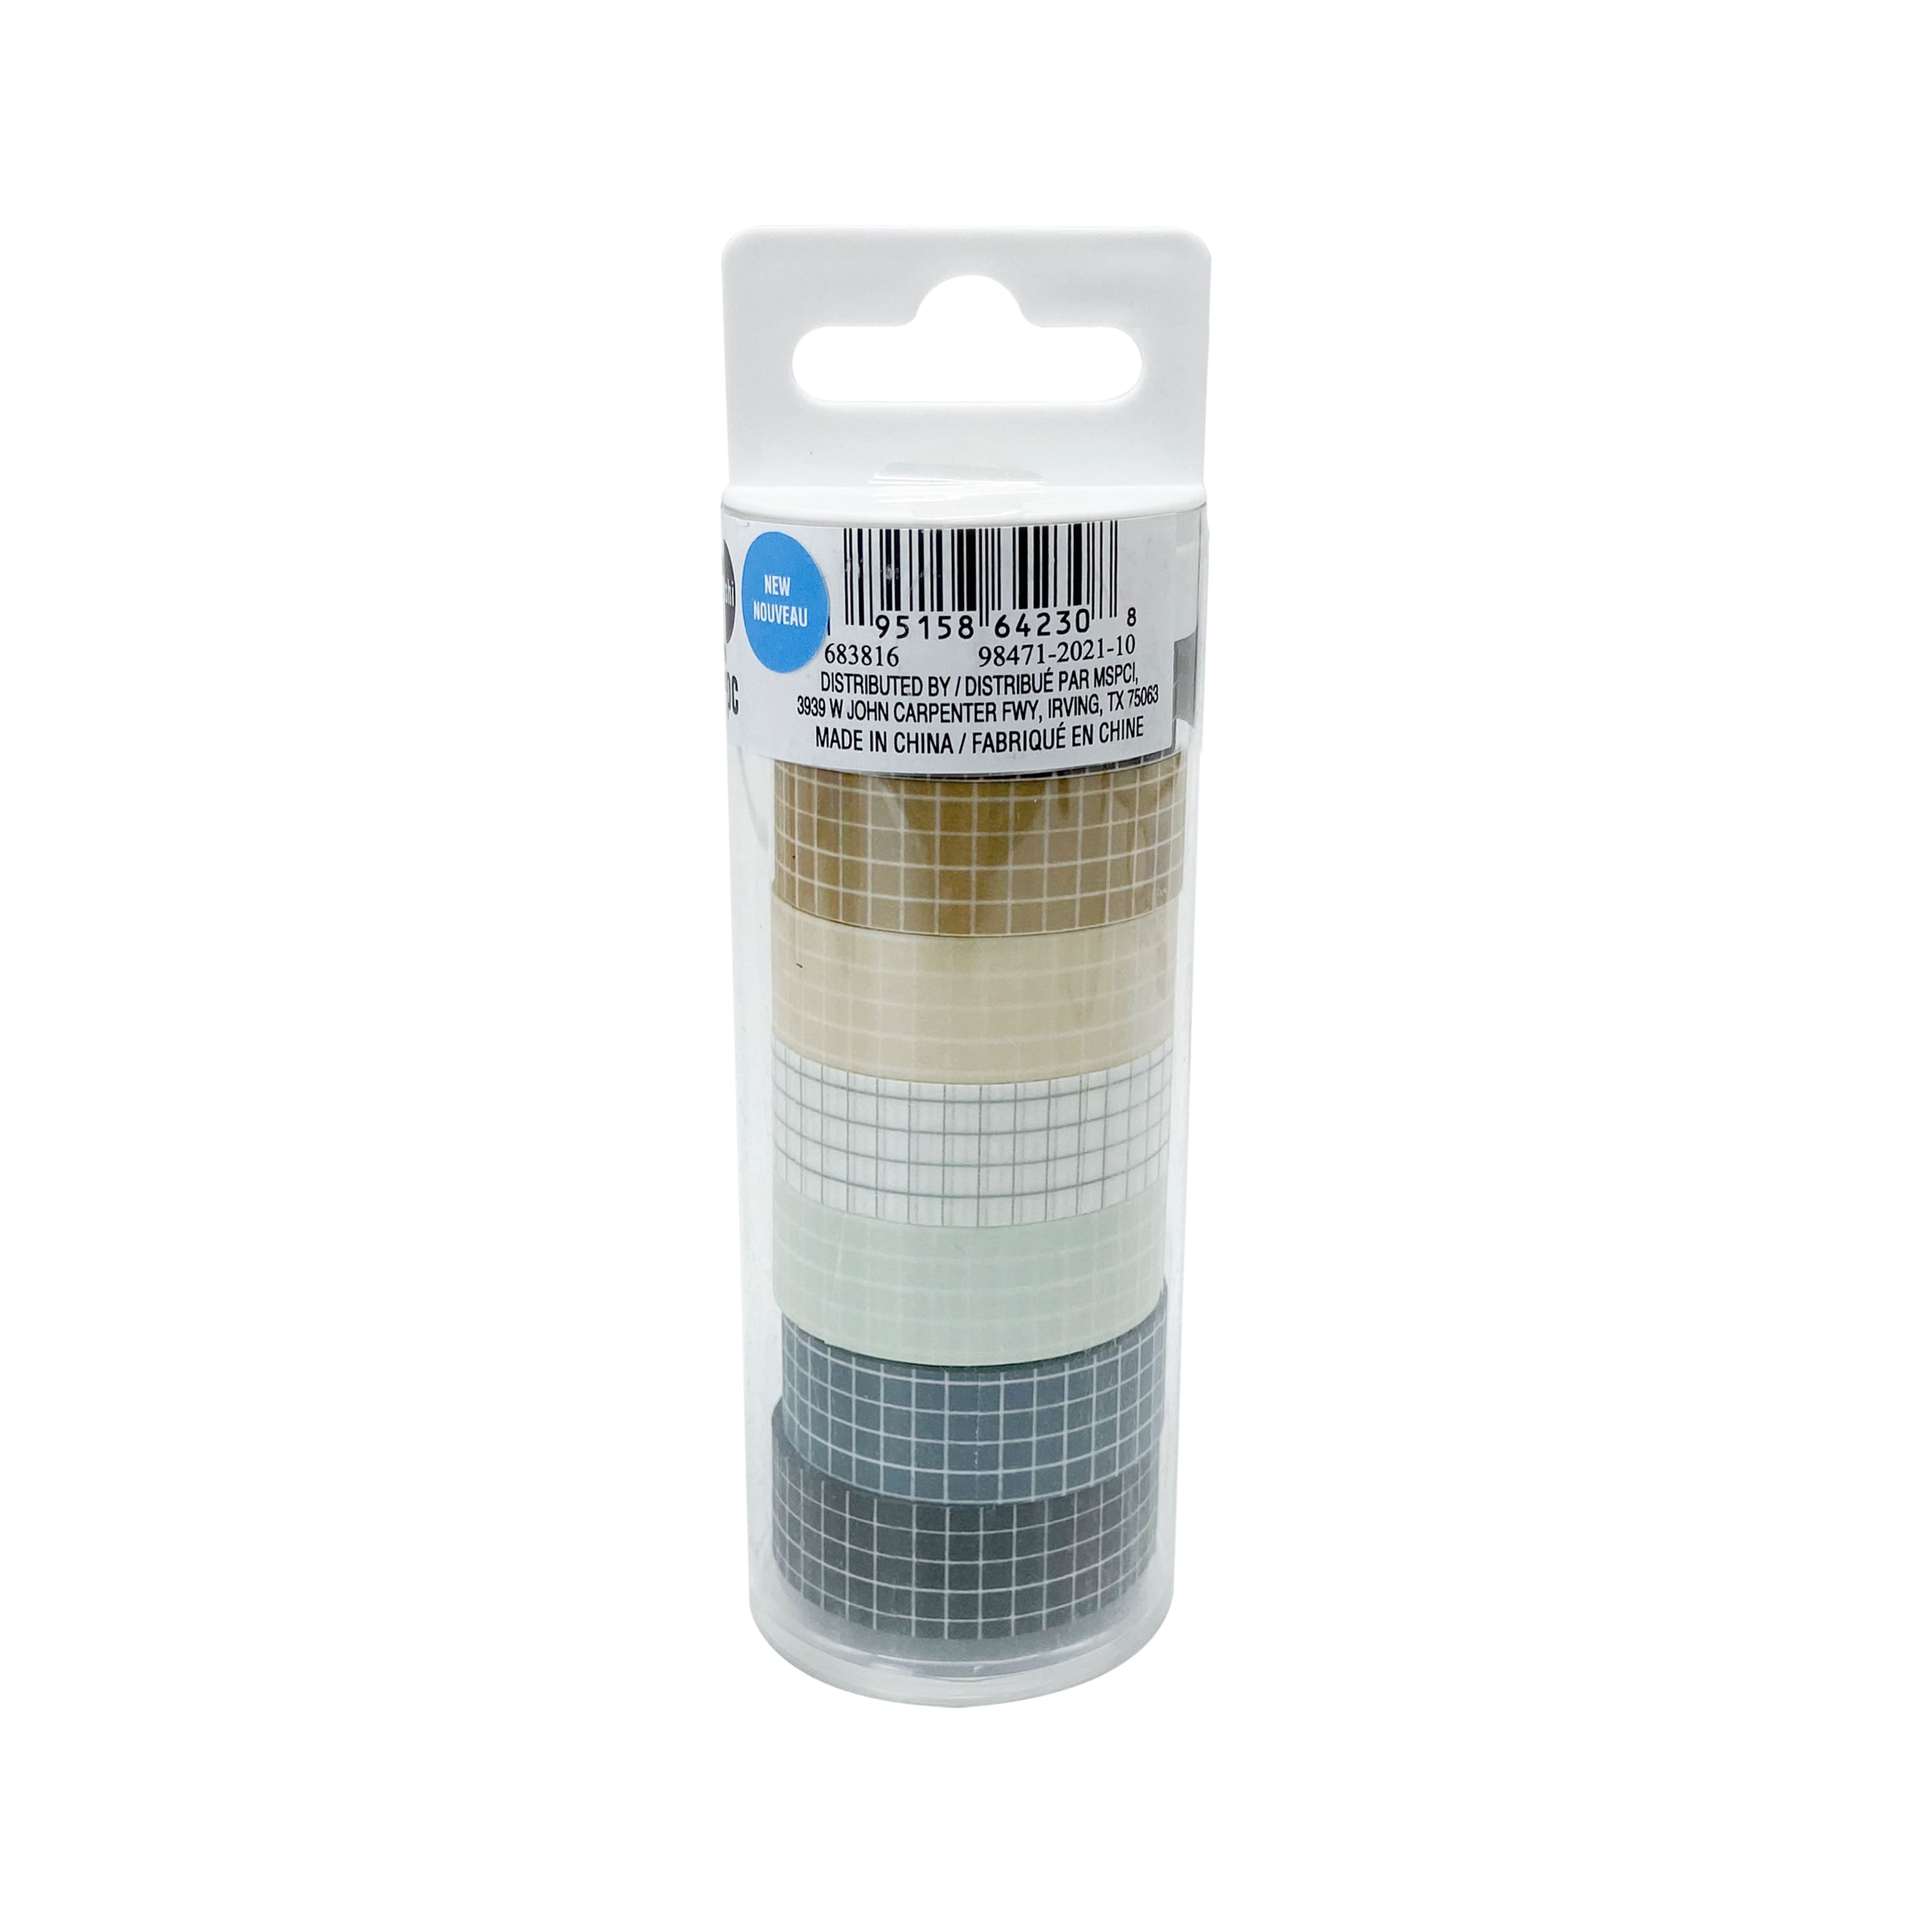 Michaels Bulk 12 Packs: 8 Ct. (96 Total) Orion's Belt Crafting Washi Tape Tube by Recollections, Size: 5.75 x 1.81 x 1.81, Assorted